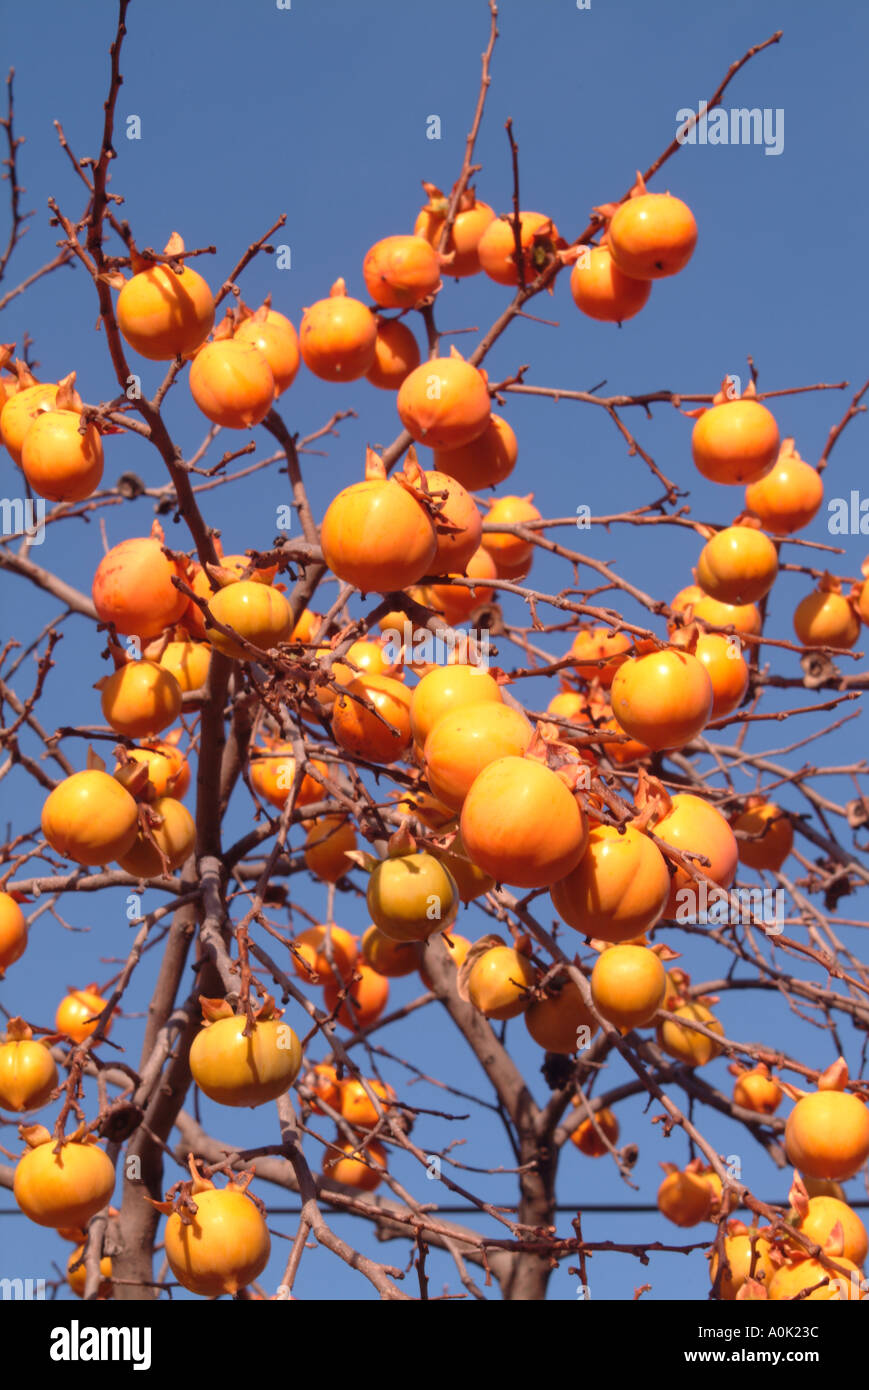 The golden fruit of the persimmon tree Stock Photo